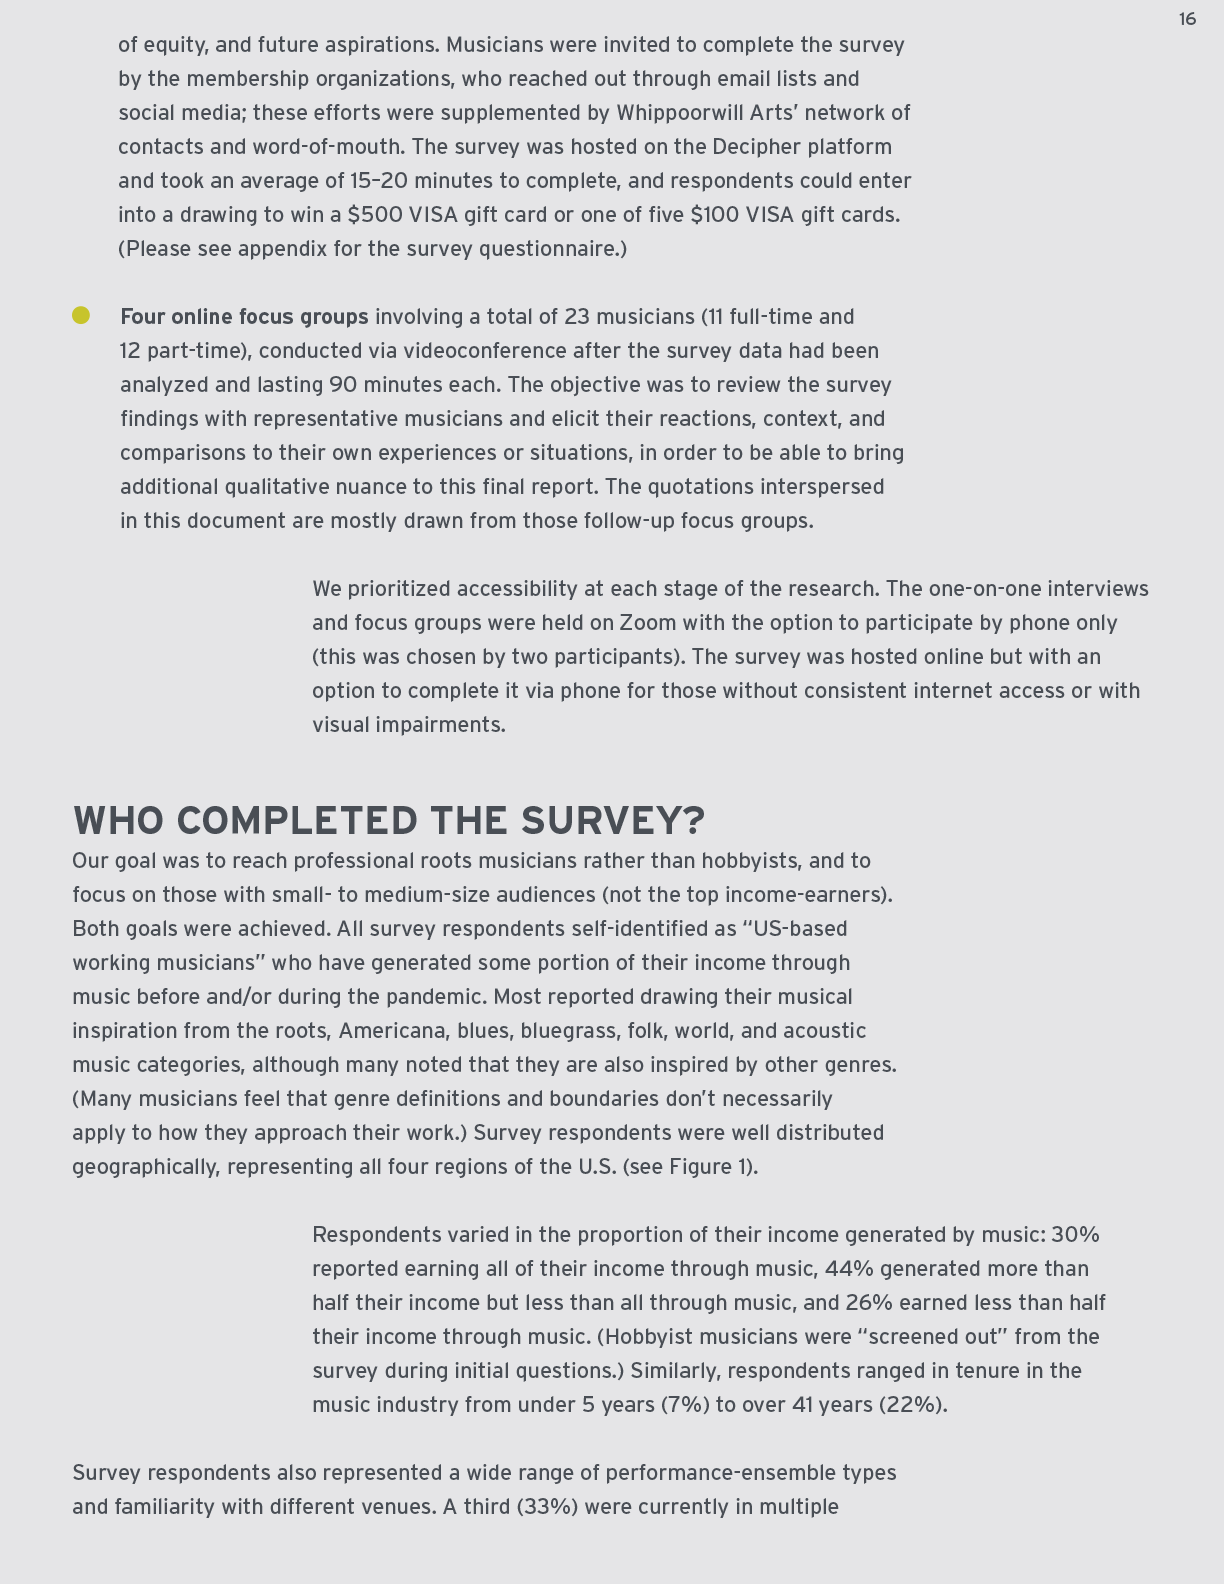 16-UPDATE Turn Up the Mic report - Findings from a 2021 national survey of roots musicians - Whippoorwill Arts and Slover Linett-16.png